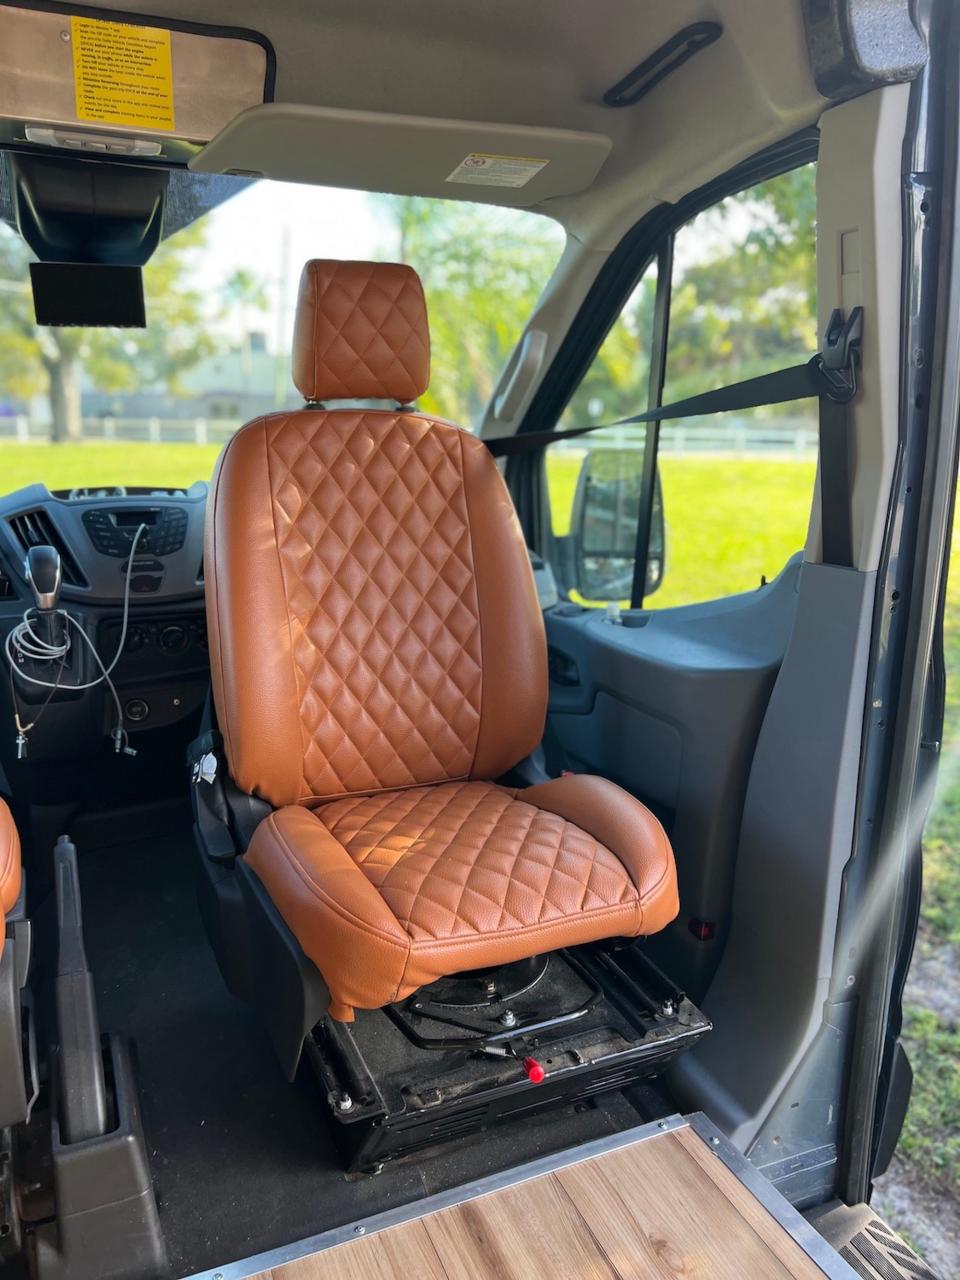 The interior of their 2019 Ford Transit van.